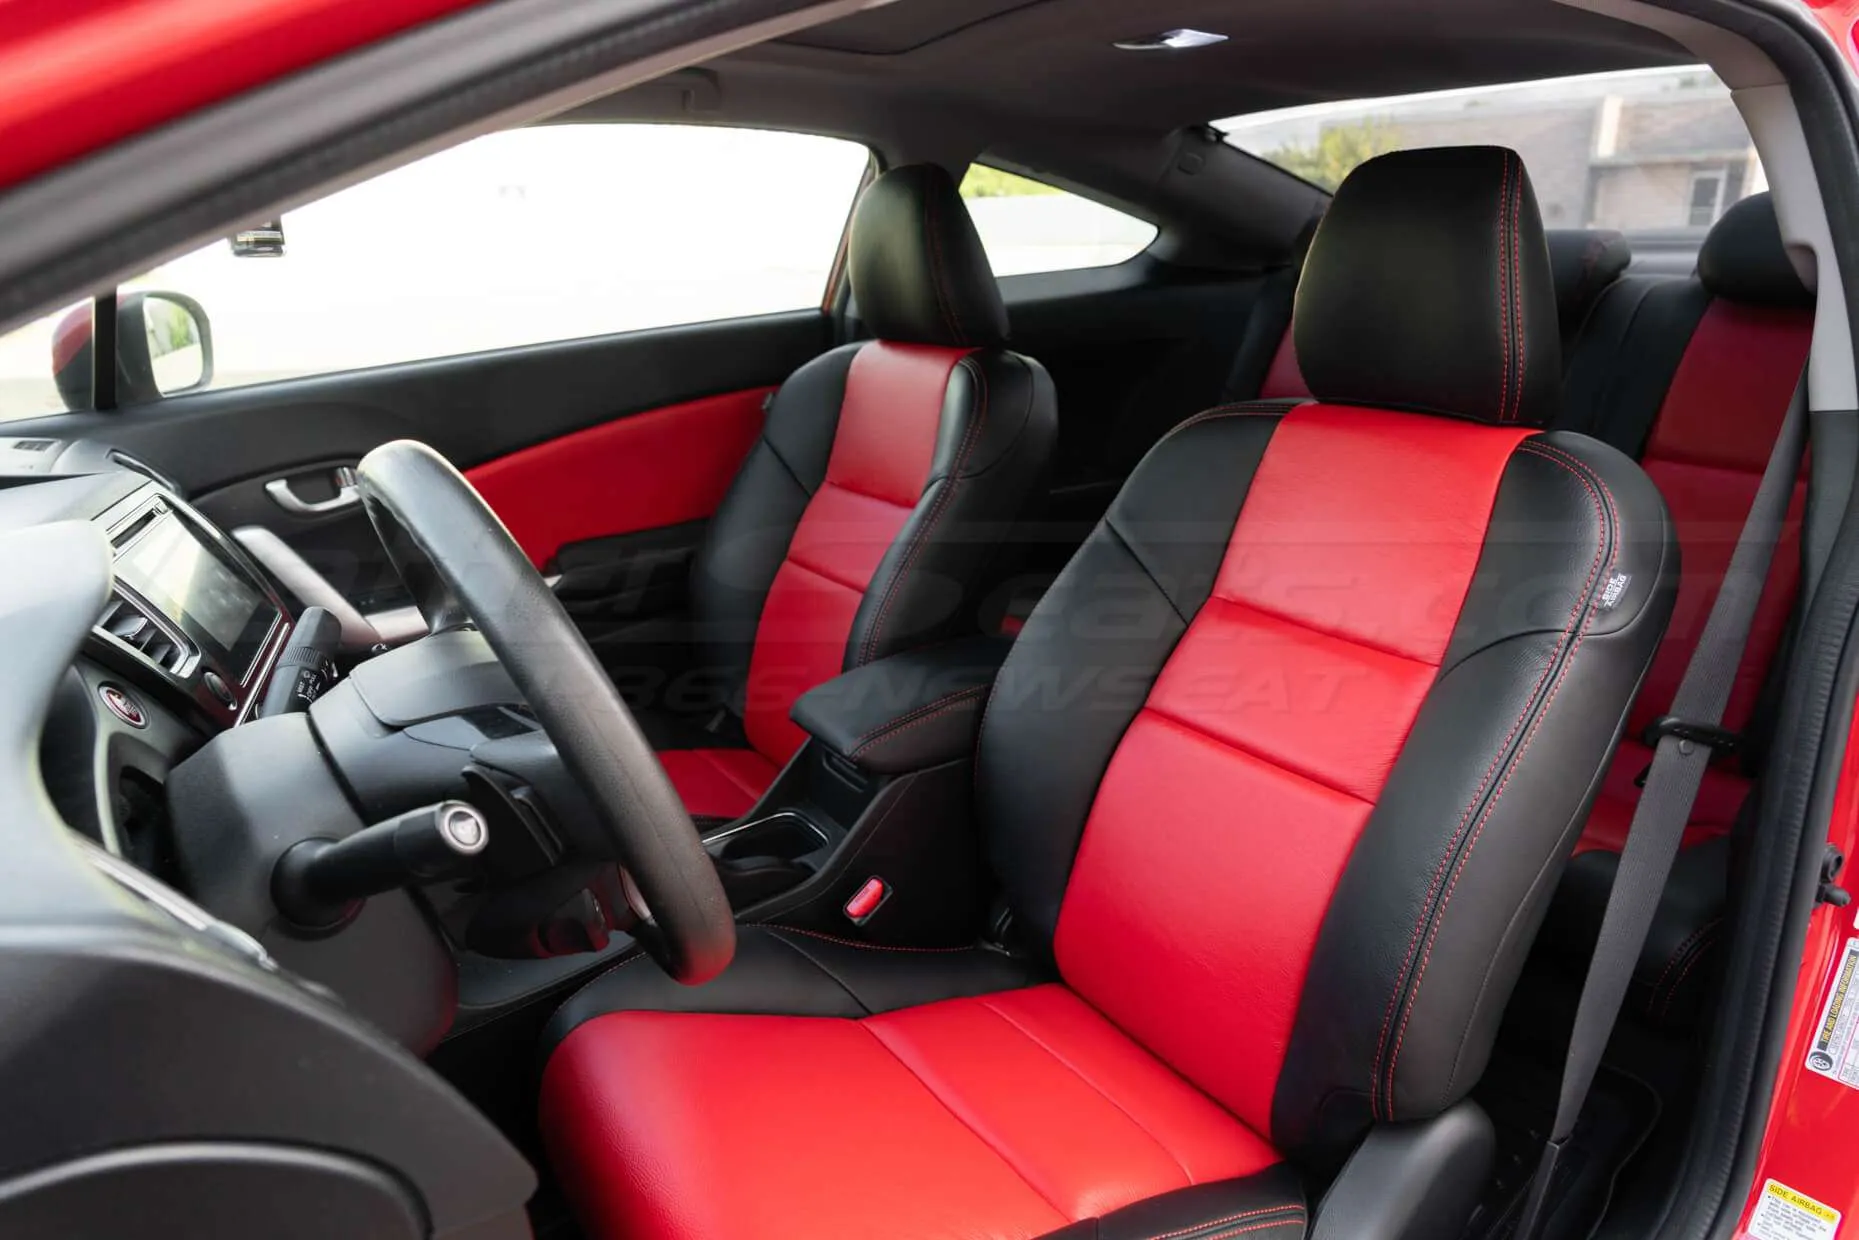 Honda Civic installed leather kit - Black & Bright Red - Front drivers side interior